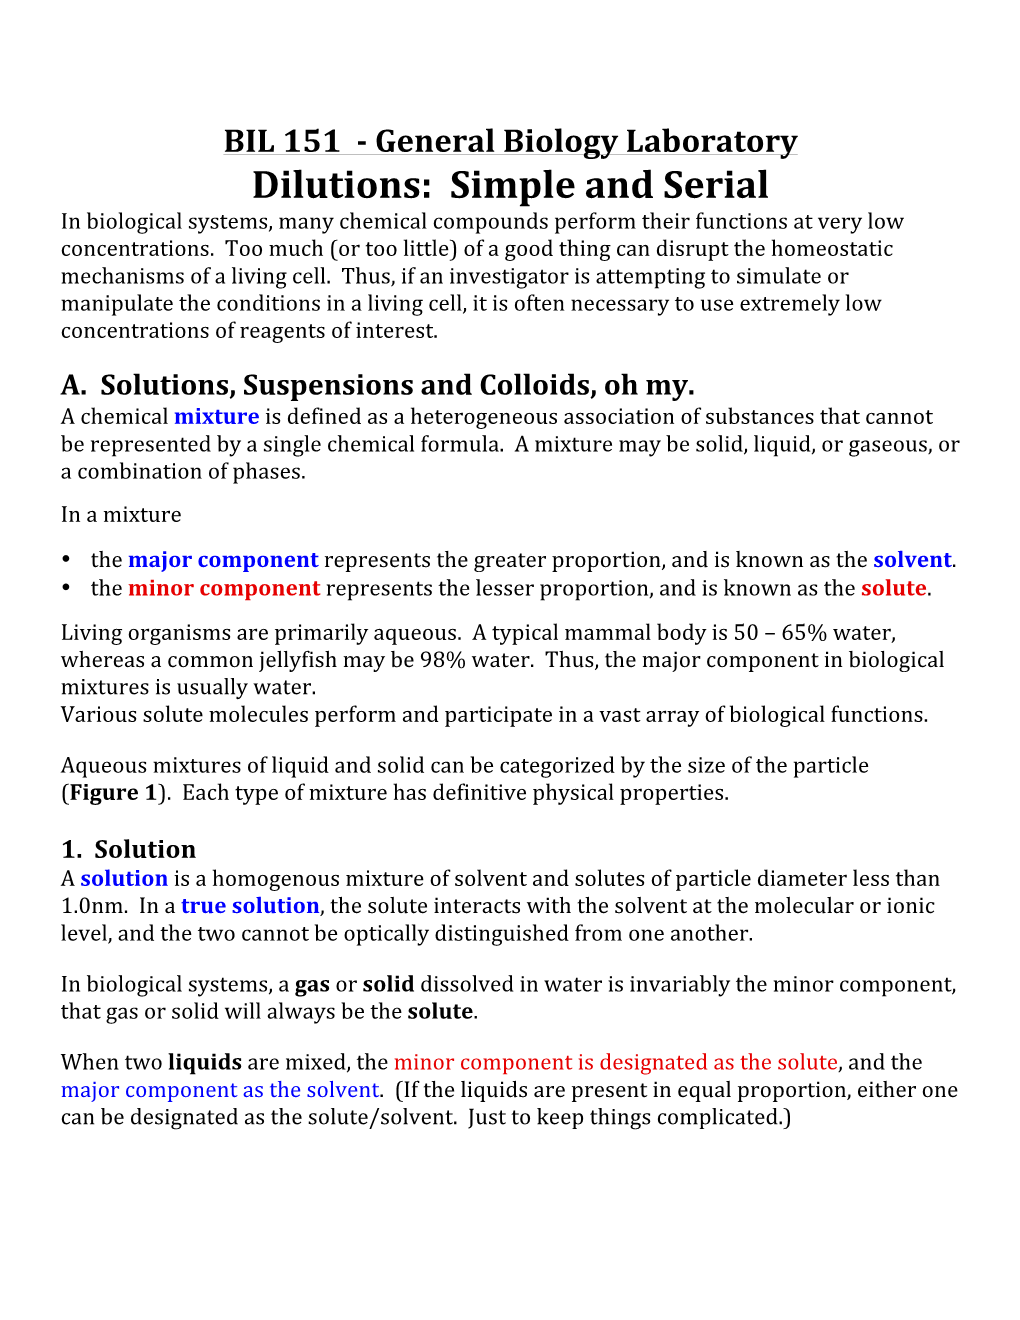 General Biology Laboratory Dilutions: Simple and Serial in Biological Systems, Many Chemical Compounds Perform Their Functions at Very Low Concentrations